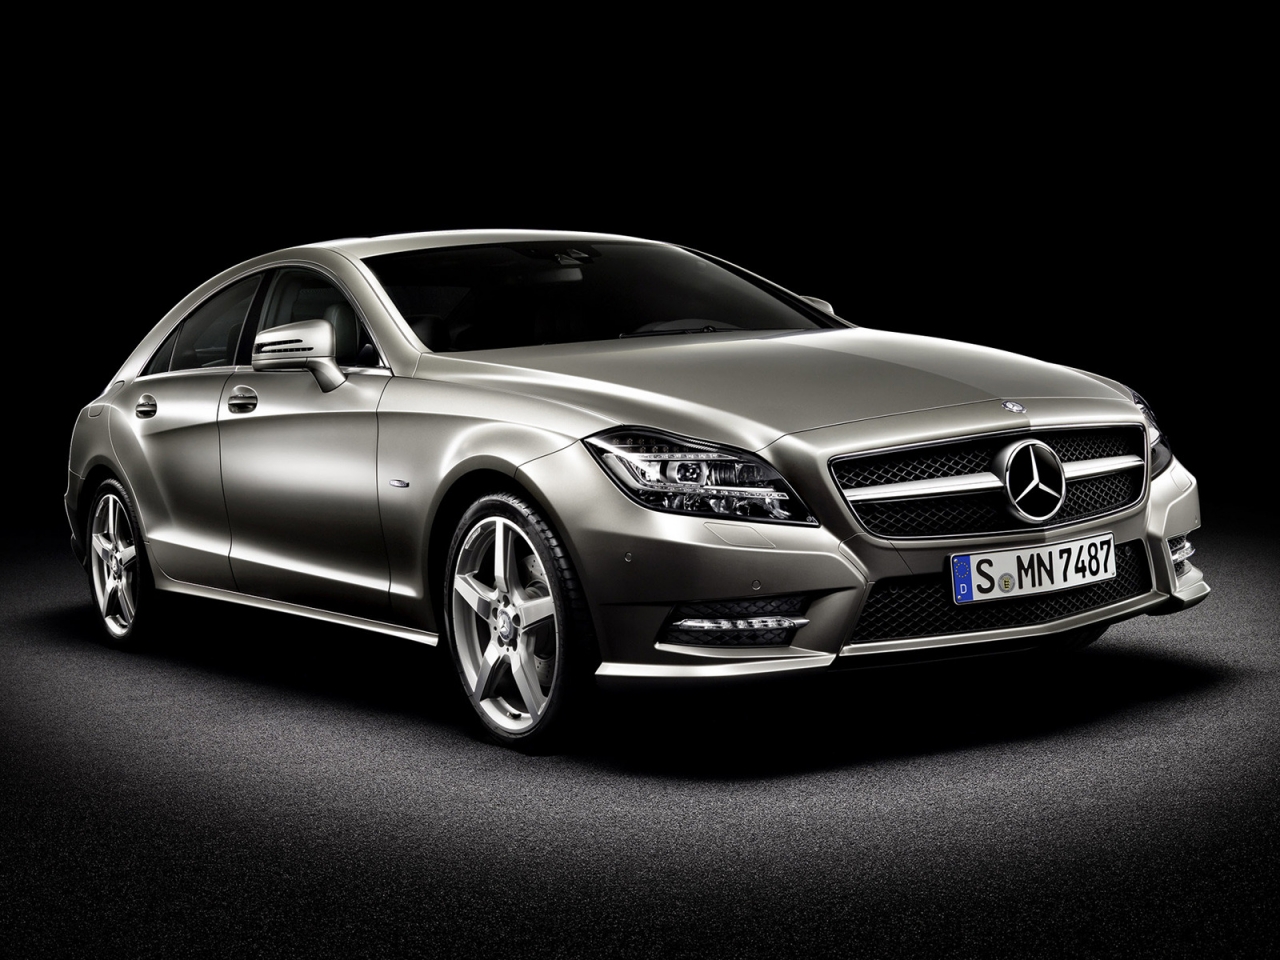 Mercedes CLS 2010 for 1280 x 960 resolution